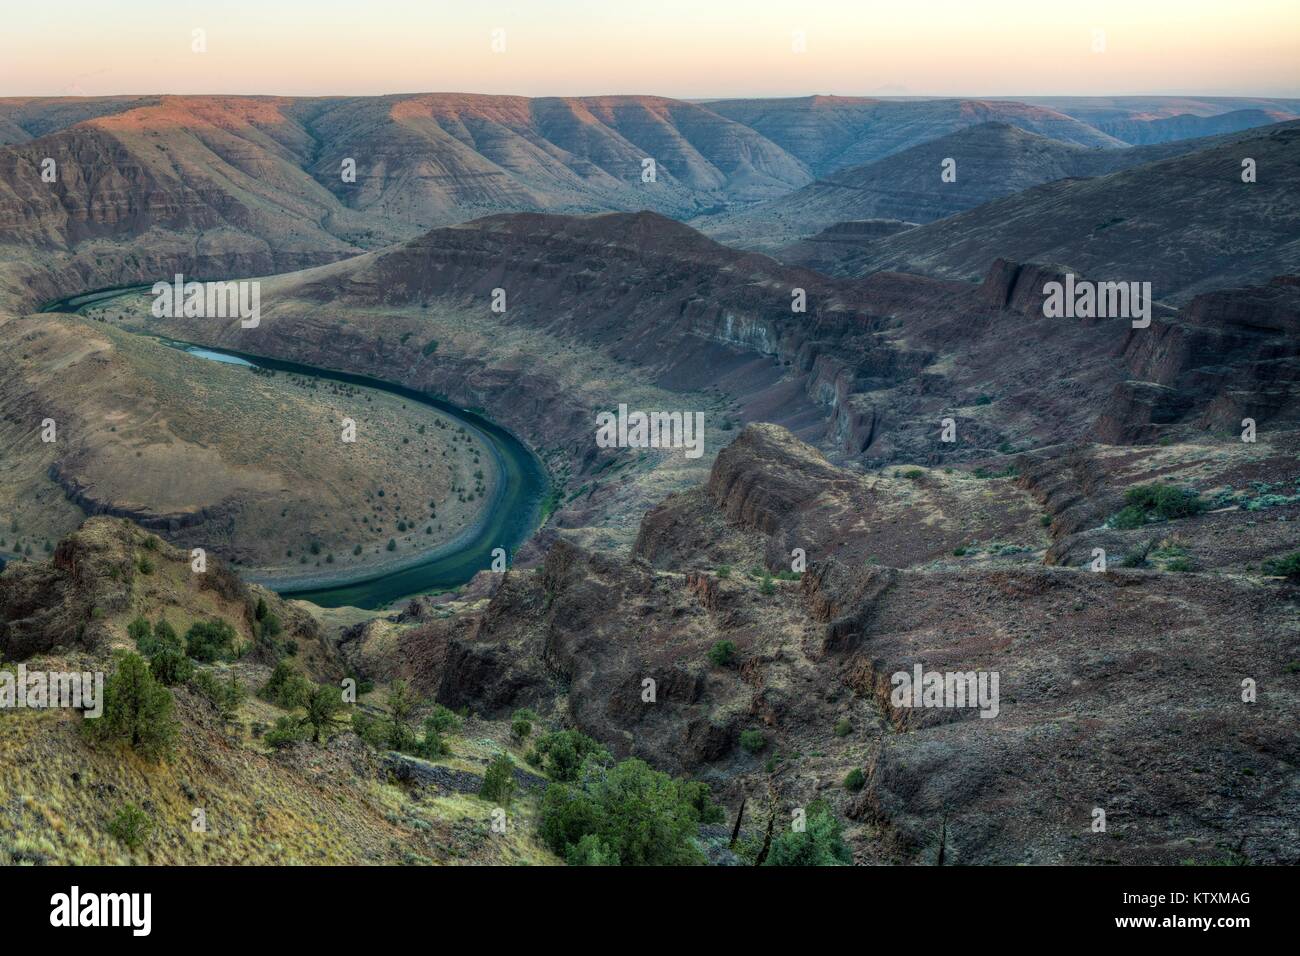 The John Day Wild and Scenic River winds through rock canyons June 9, 2016 in Oregon. Stock Photo